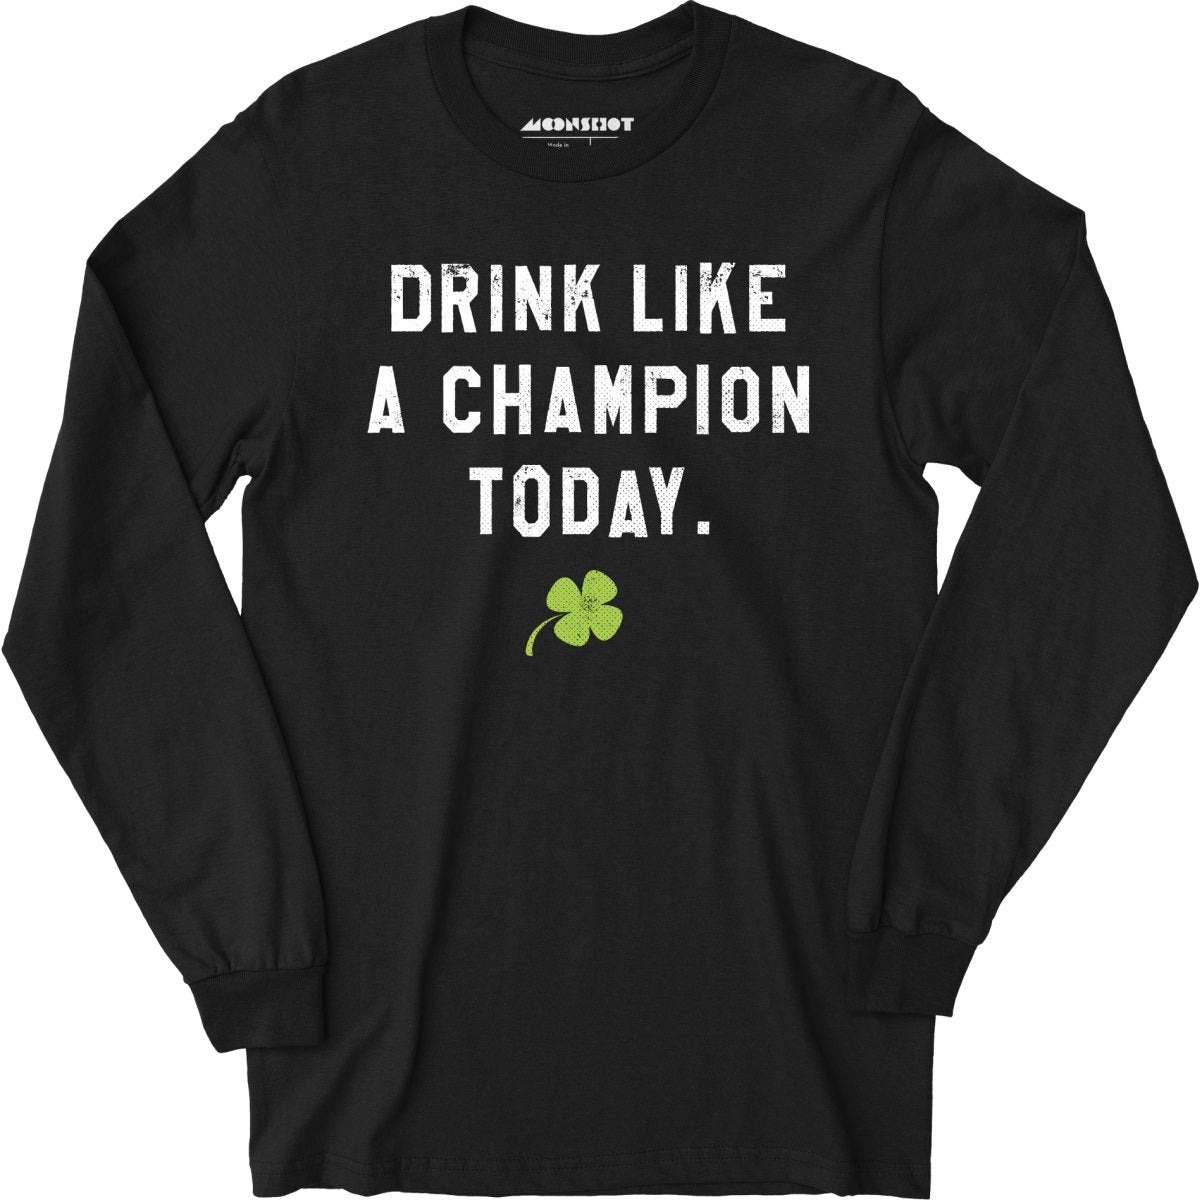 Drink Like a Champion Today - Long Sleeve T-Shirt